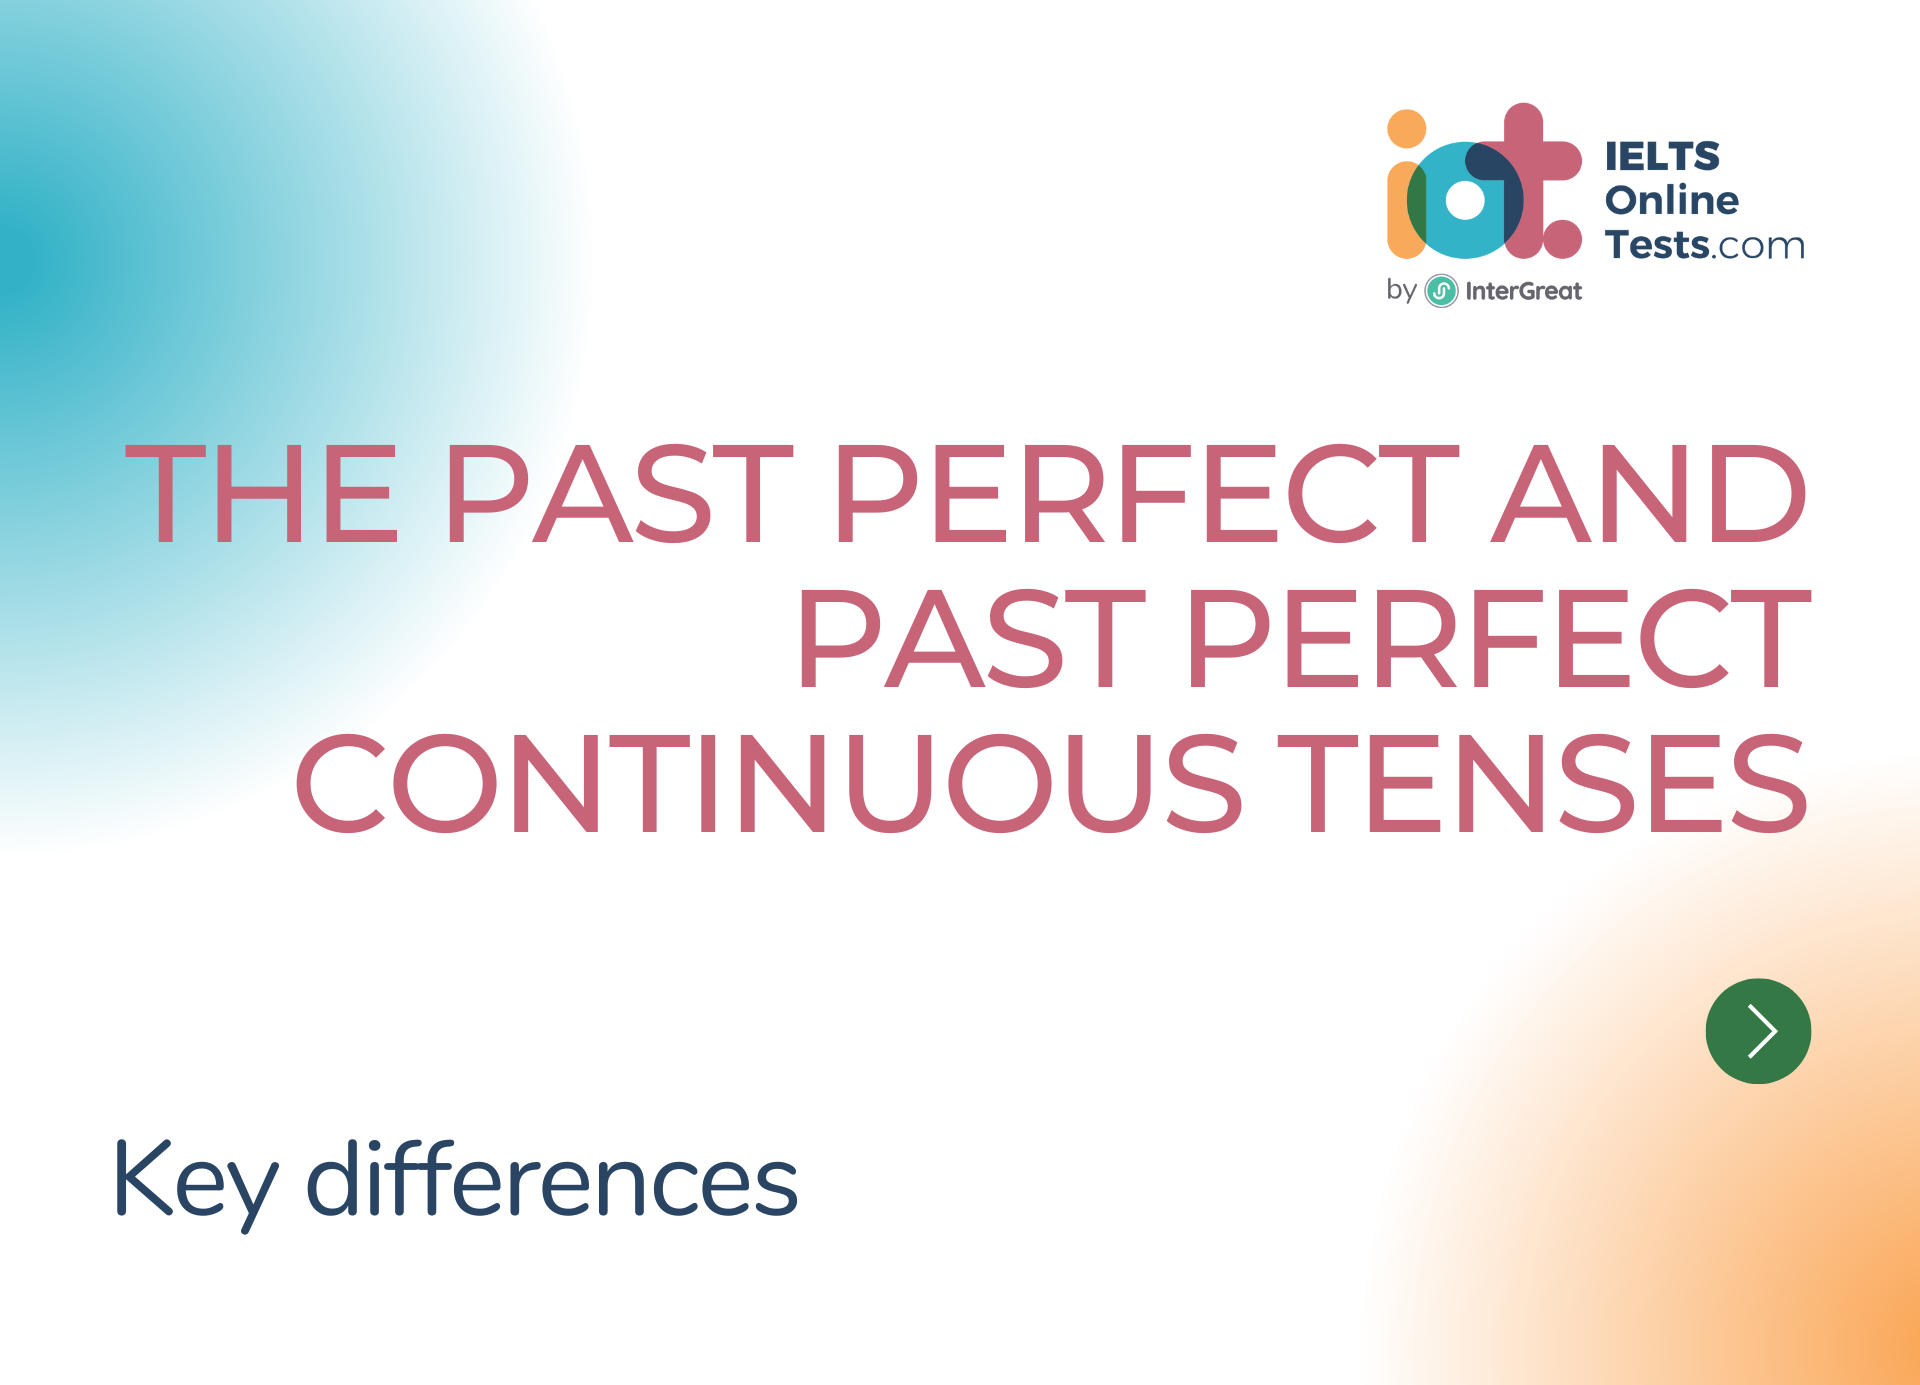 Key differences between the Past Perfect and Past Perfect Continuous Tenses